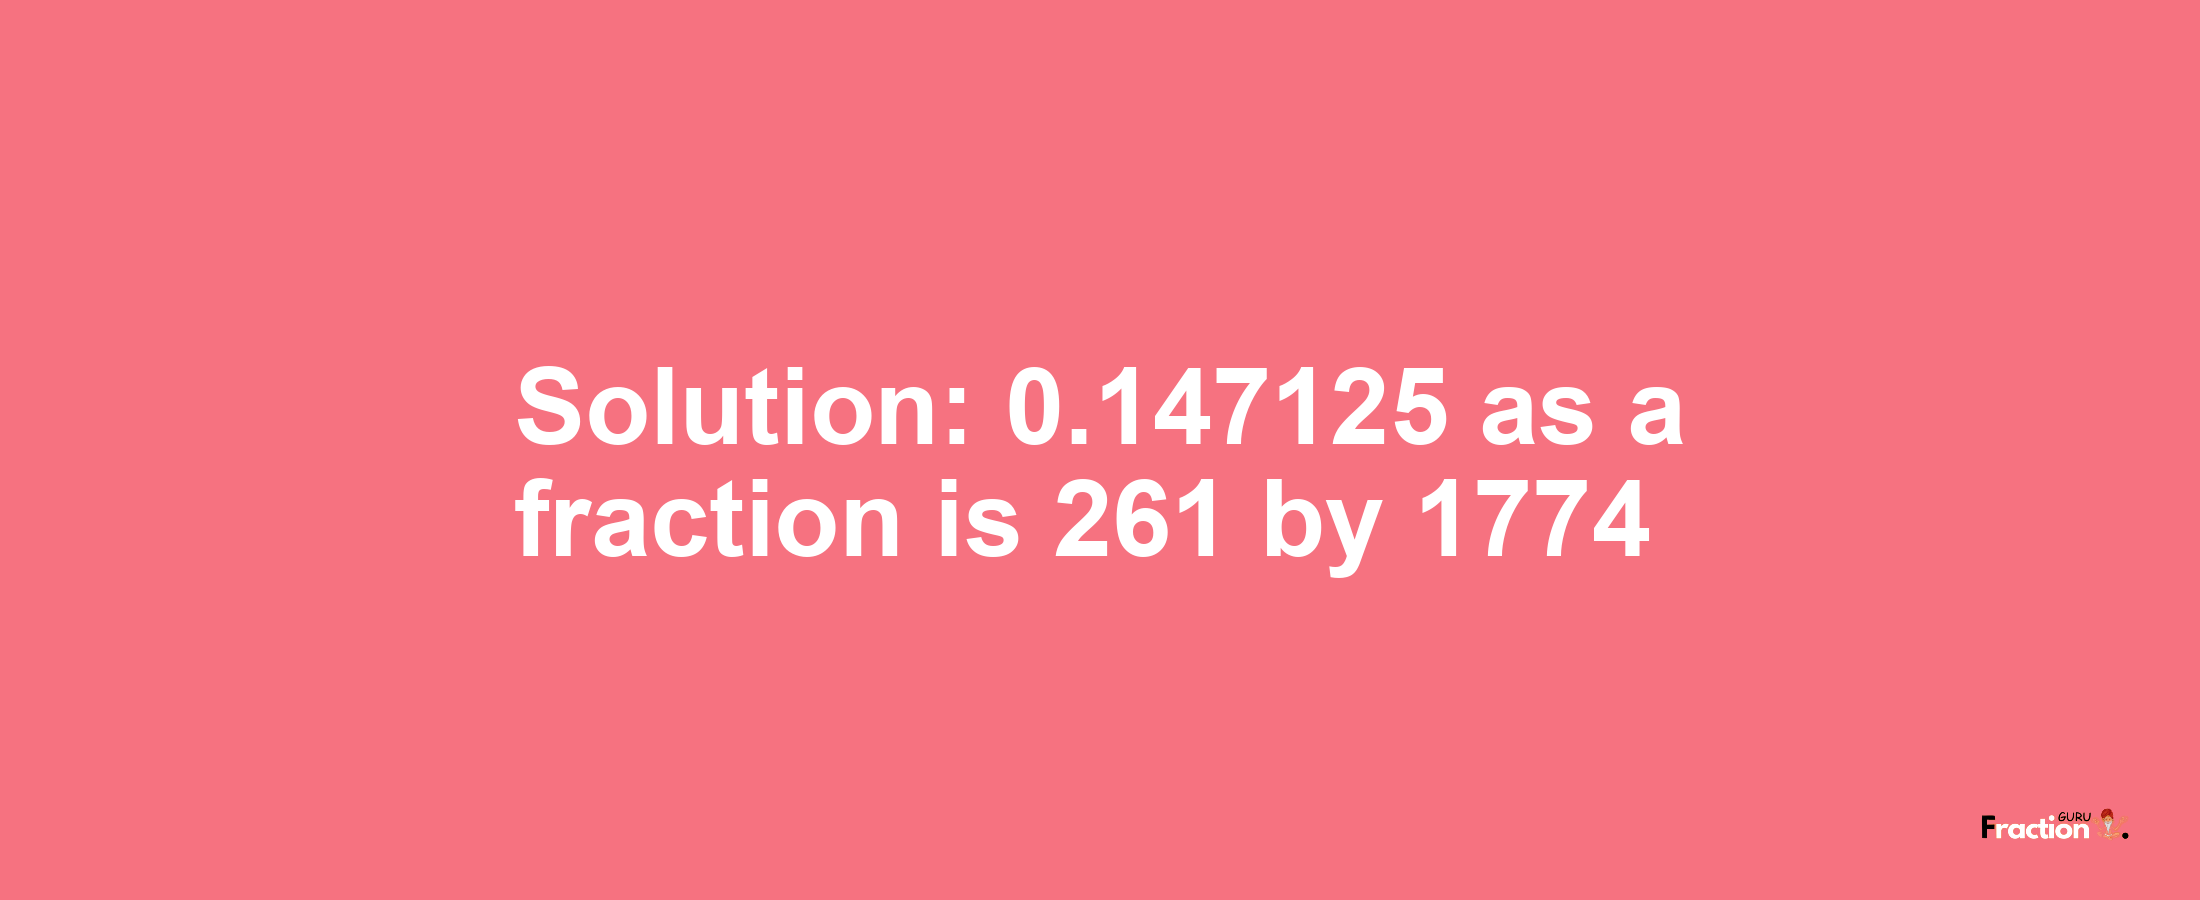 Solution:0.147125 as a fraction is 261/1774